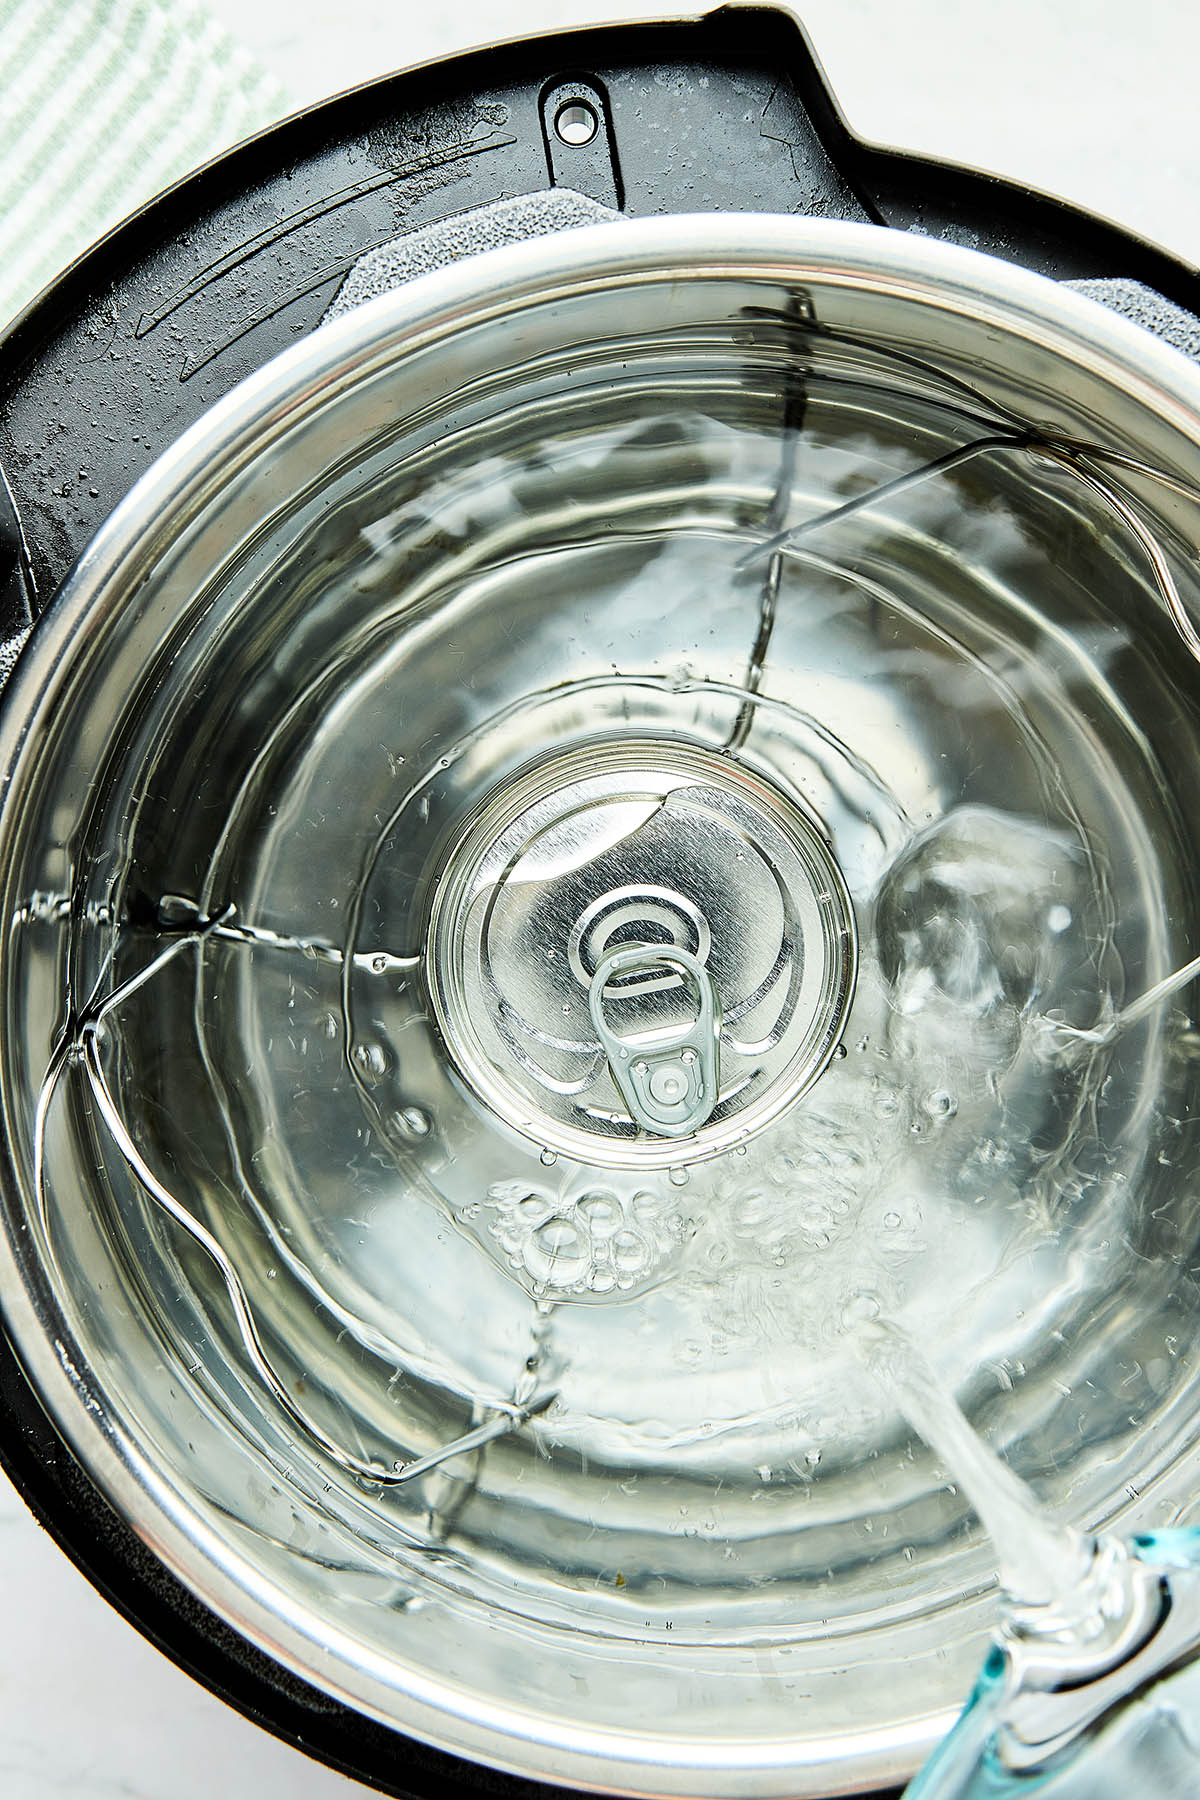 A small can standing inside an Instant pot as the pot is being filled with water from a glass Pyrex measuring cup.